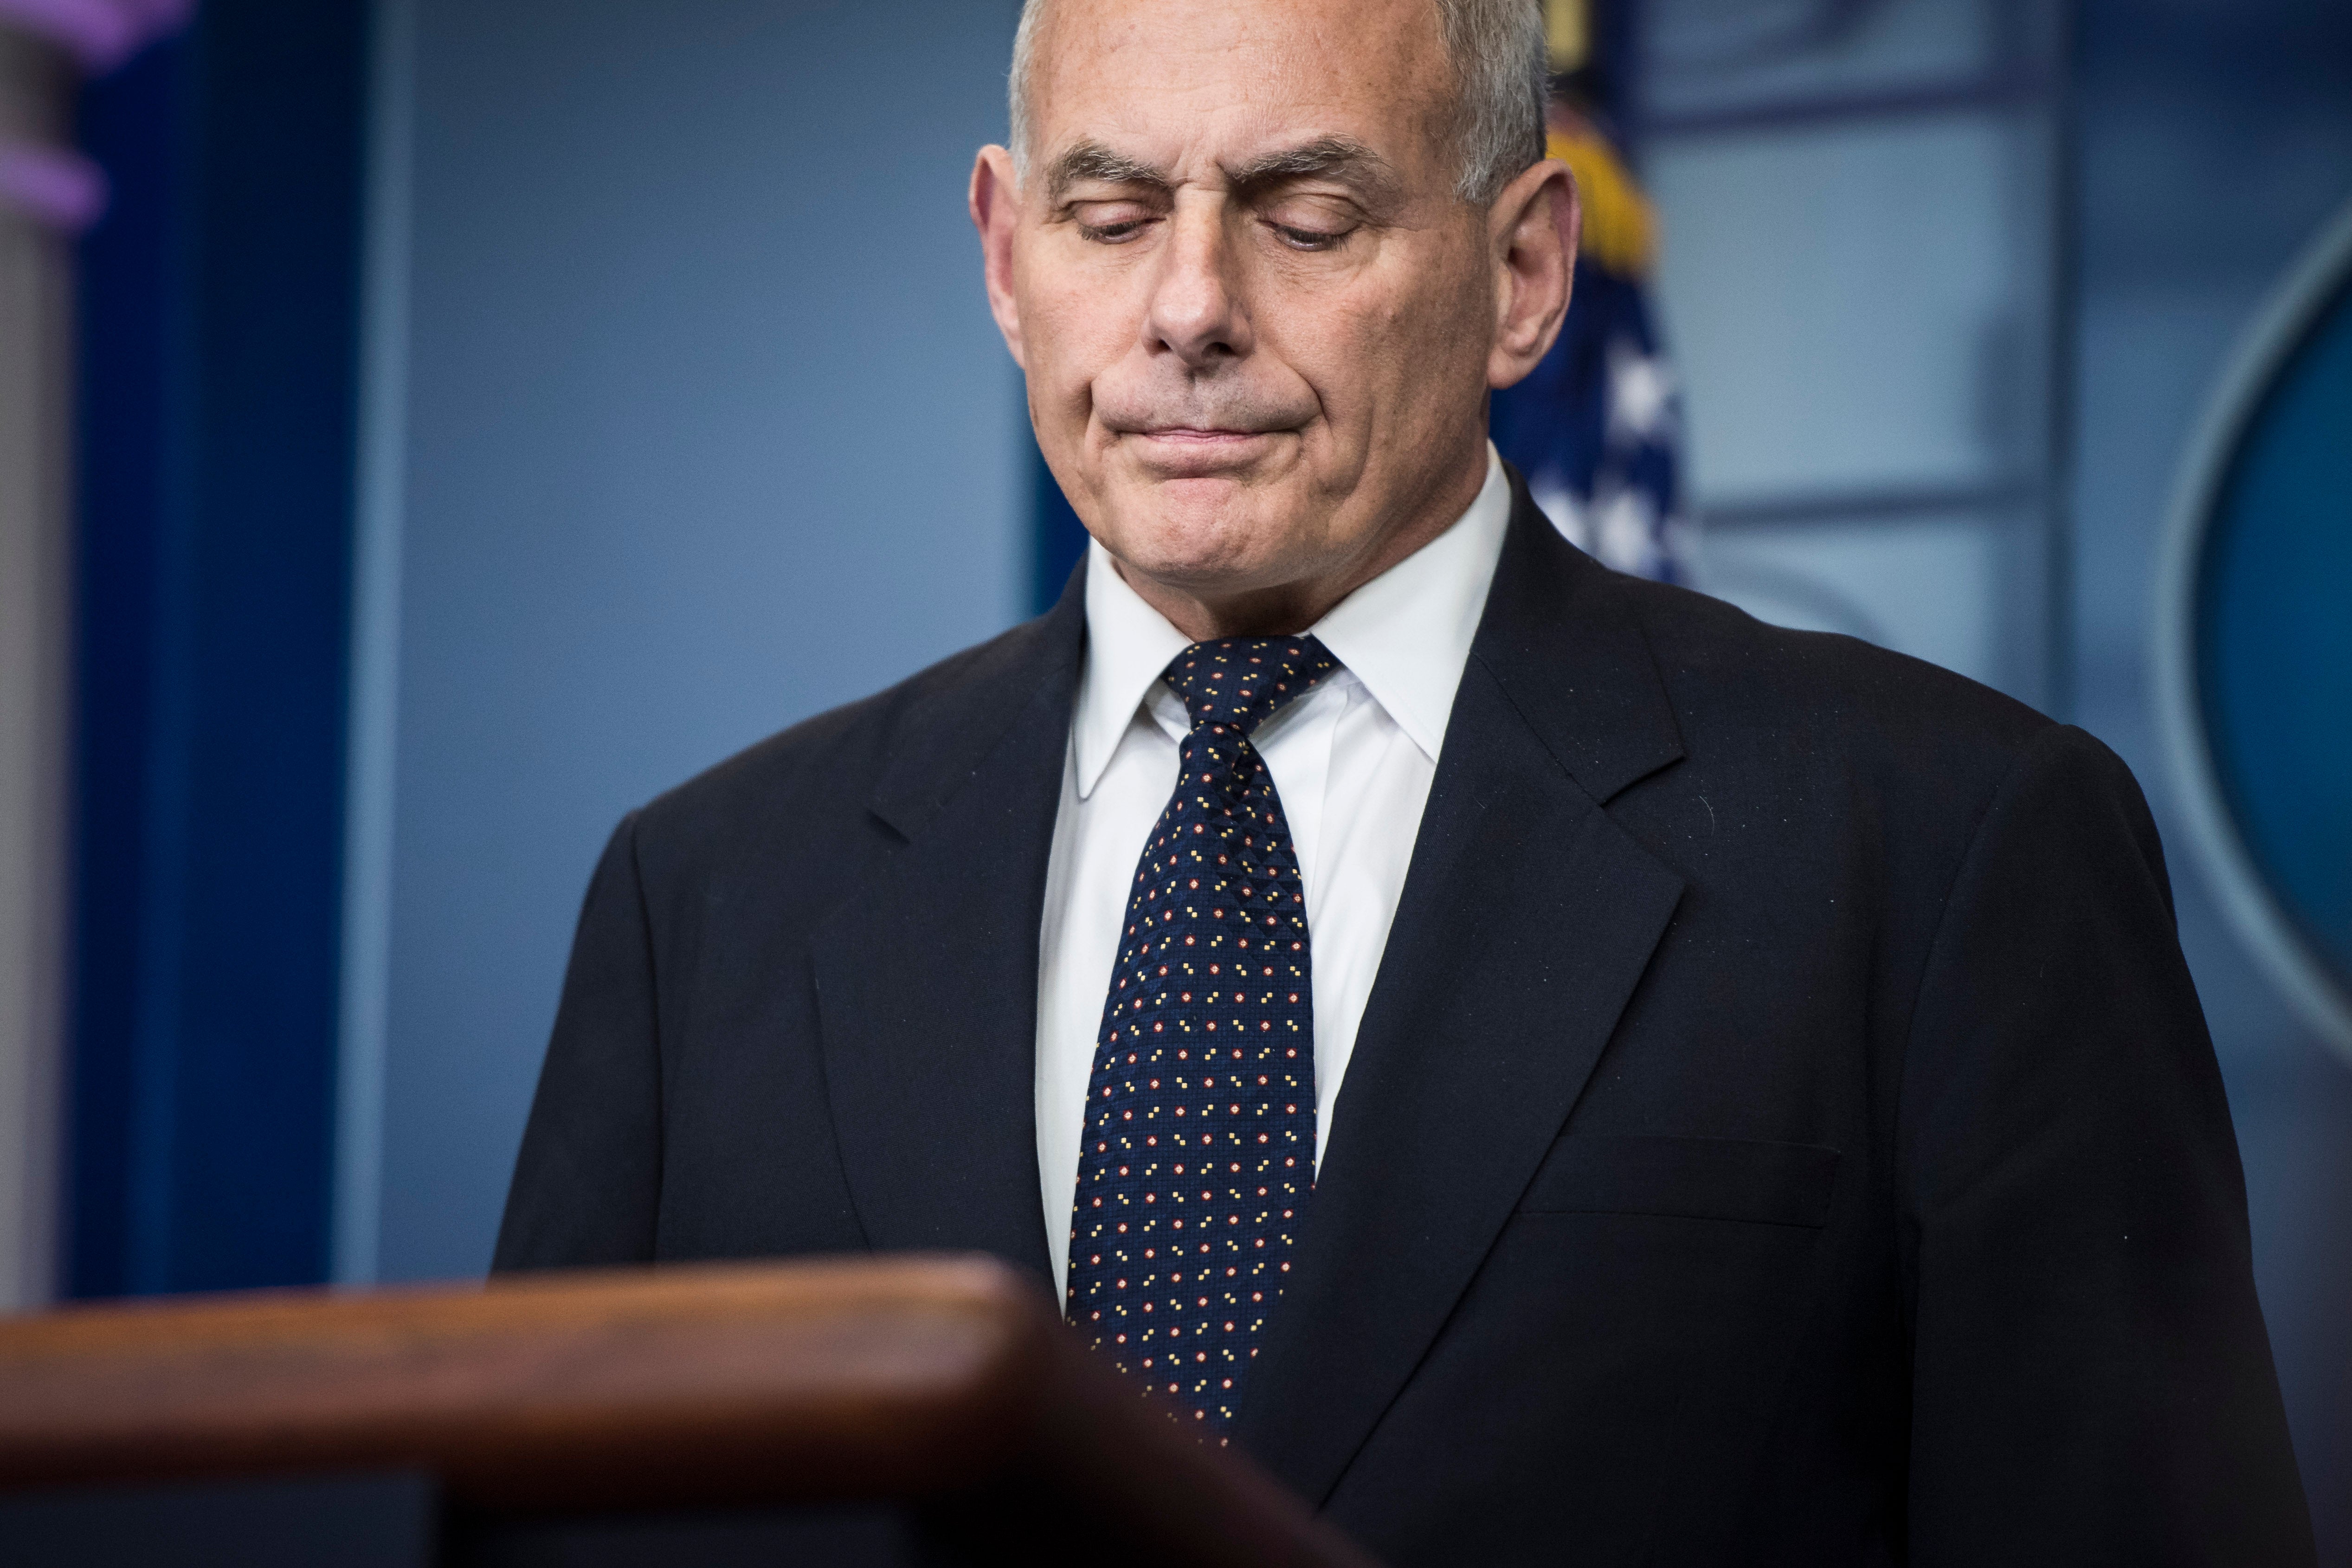 This Video Shows John Kelly Misrepresented a Speech Rep. Frederica Wilson Gave in 2015
